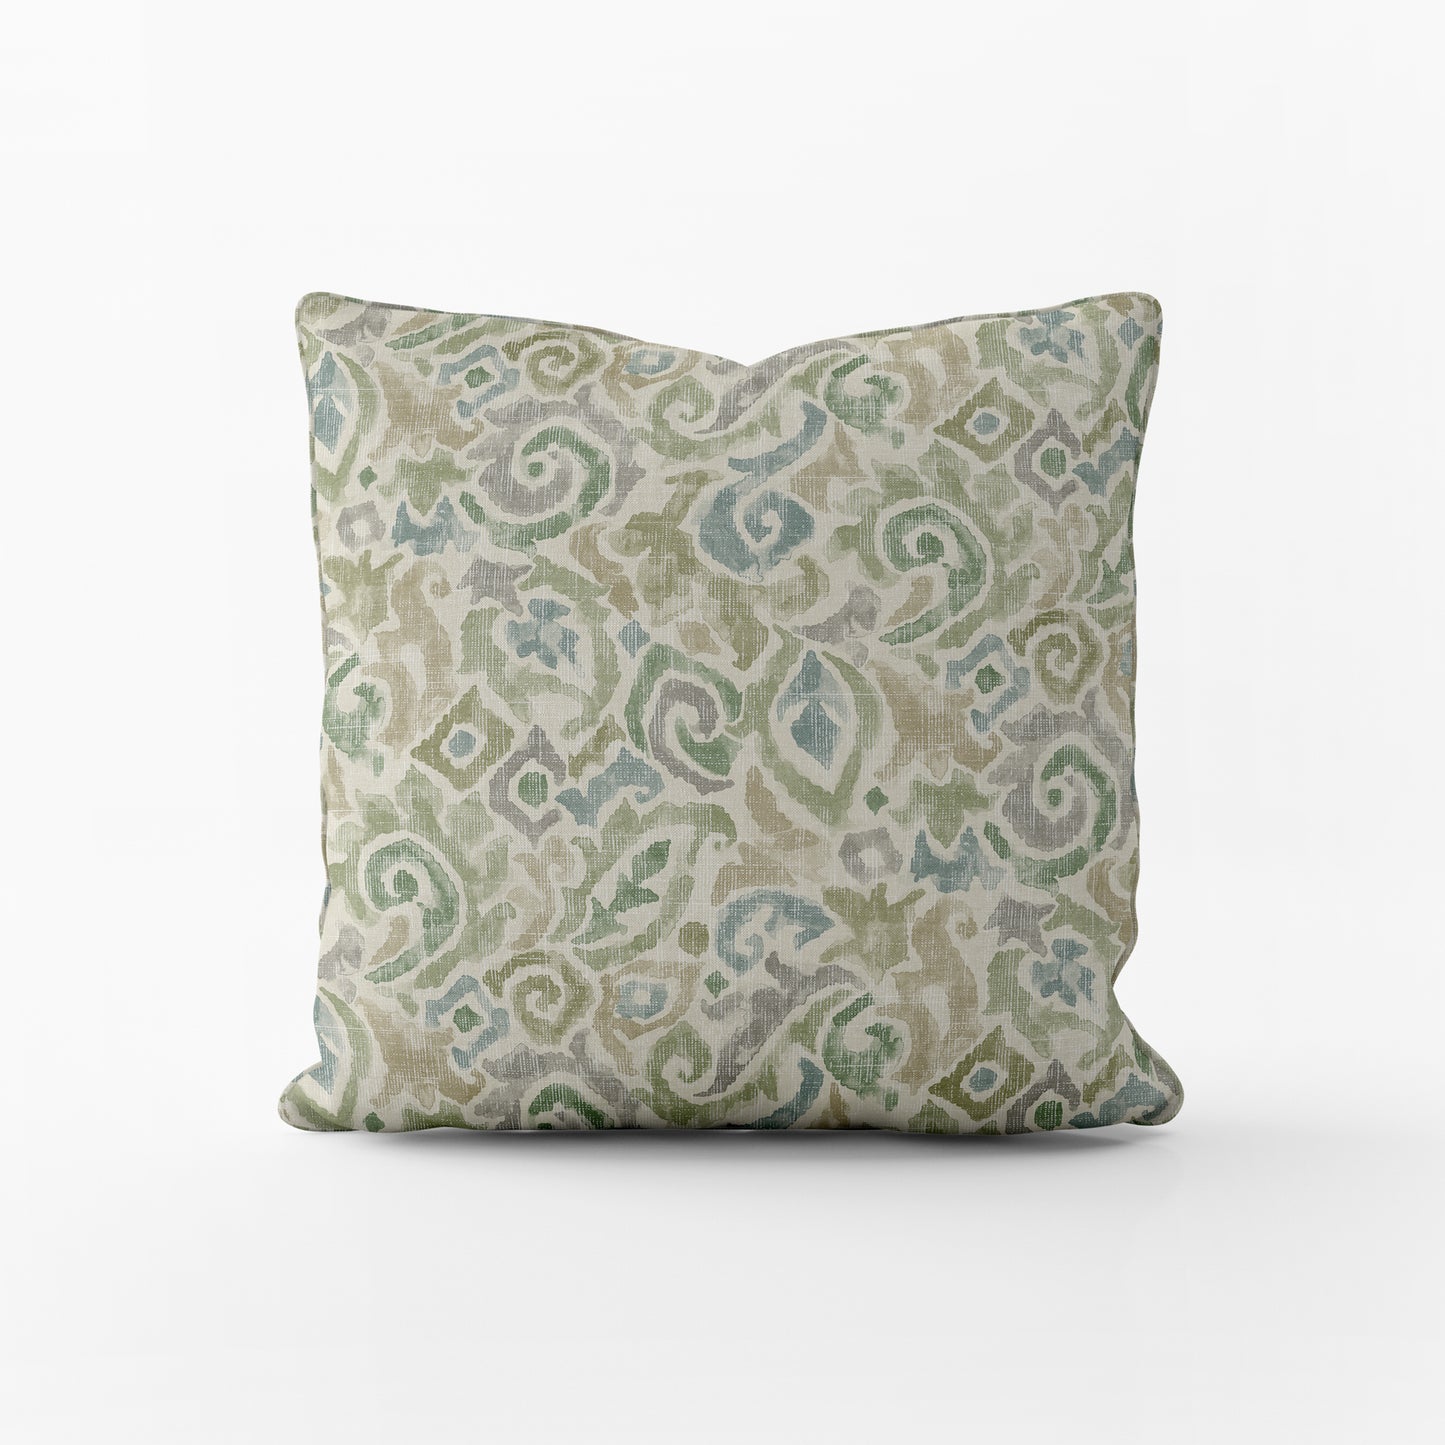 Decorative Pillows in Jester Bay Green Paisley Watercolor